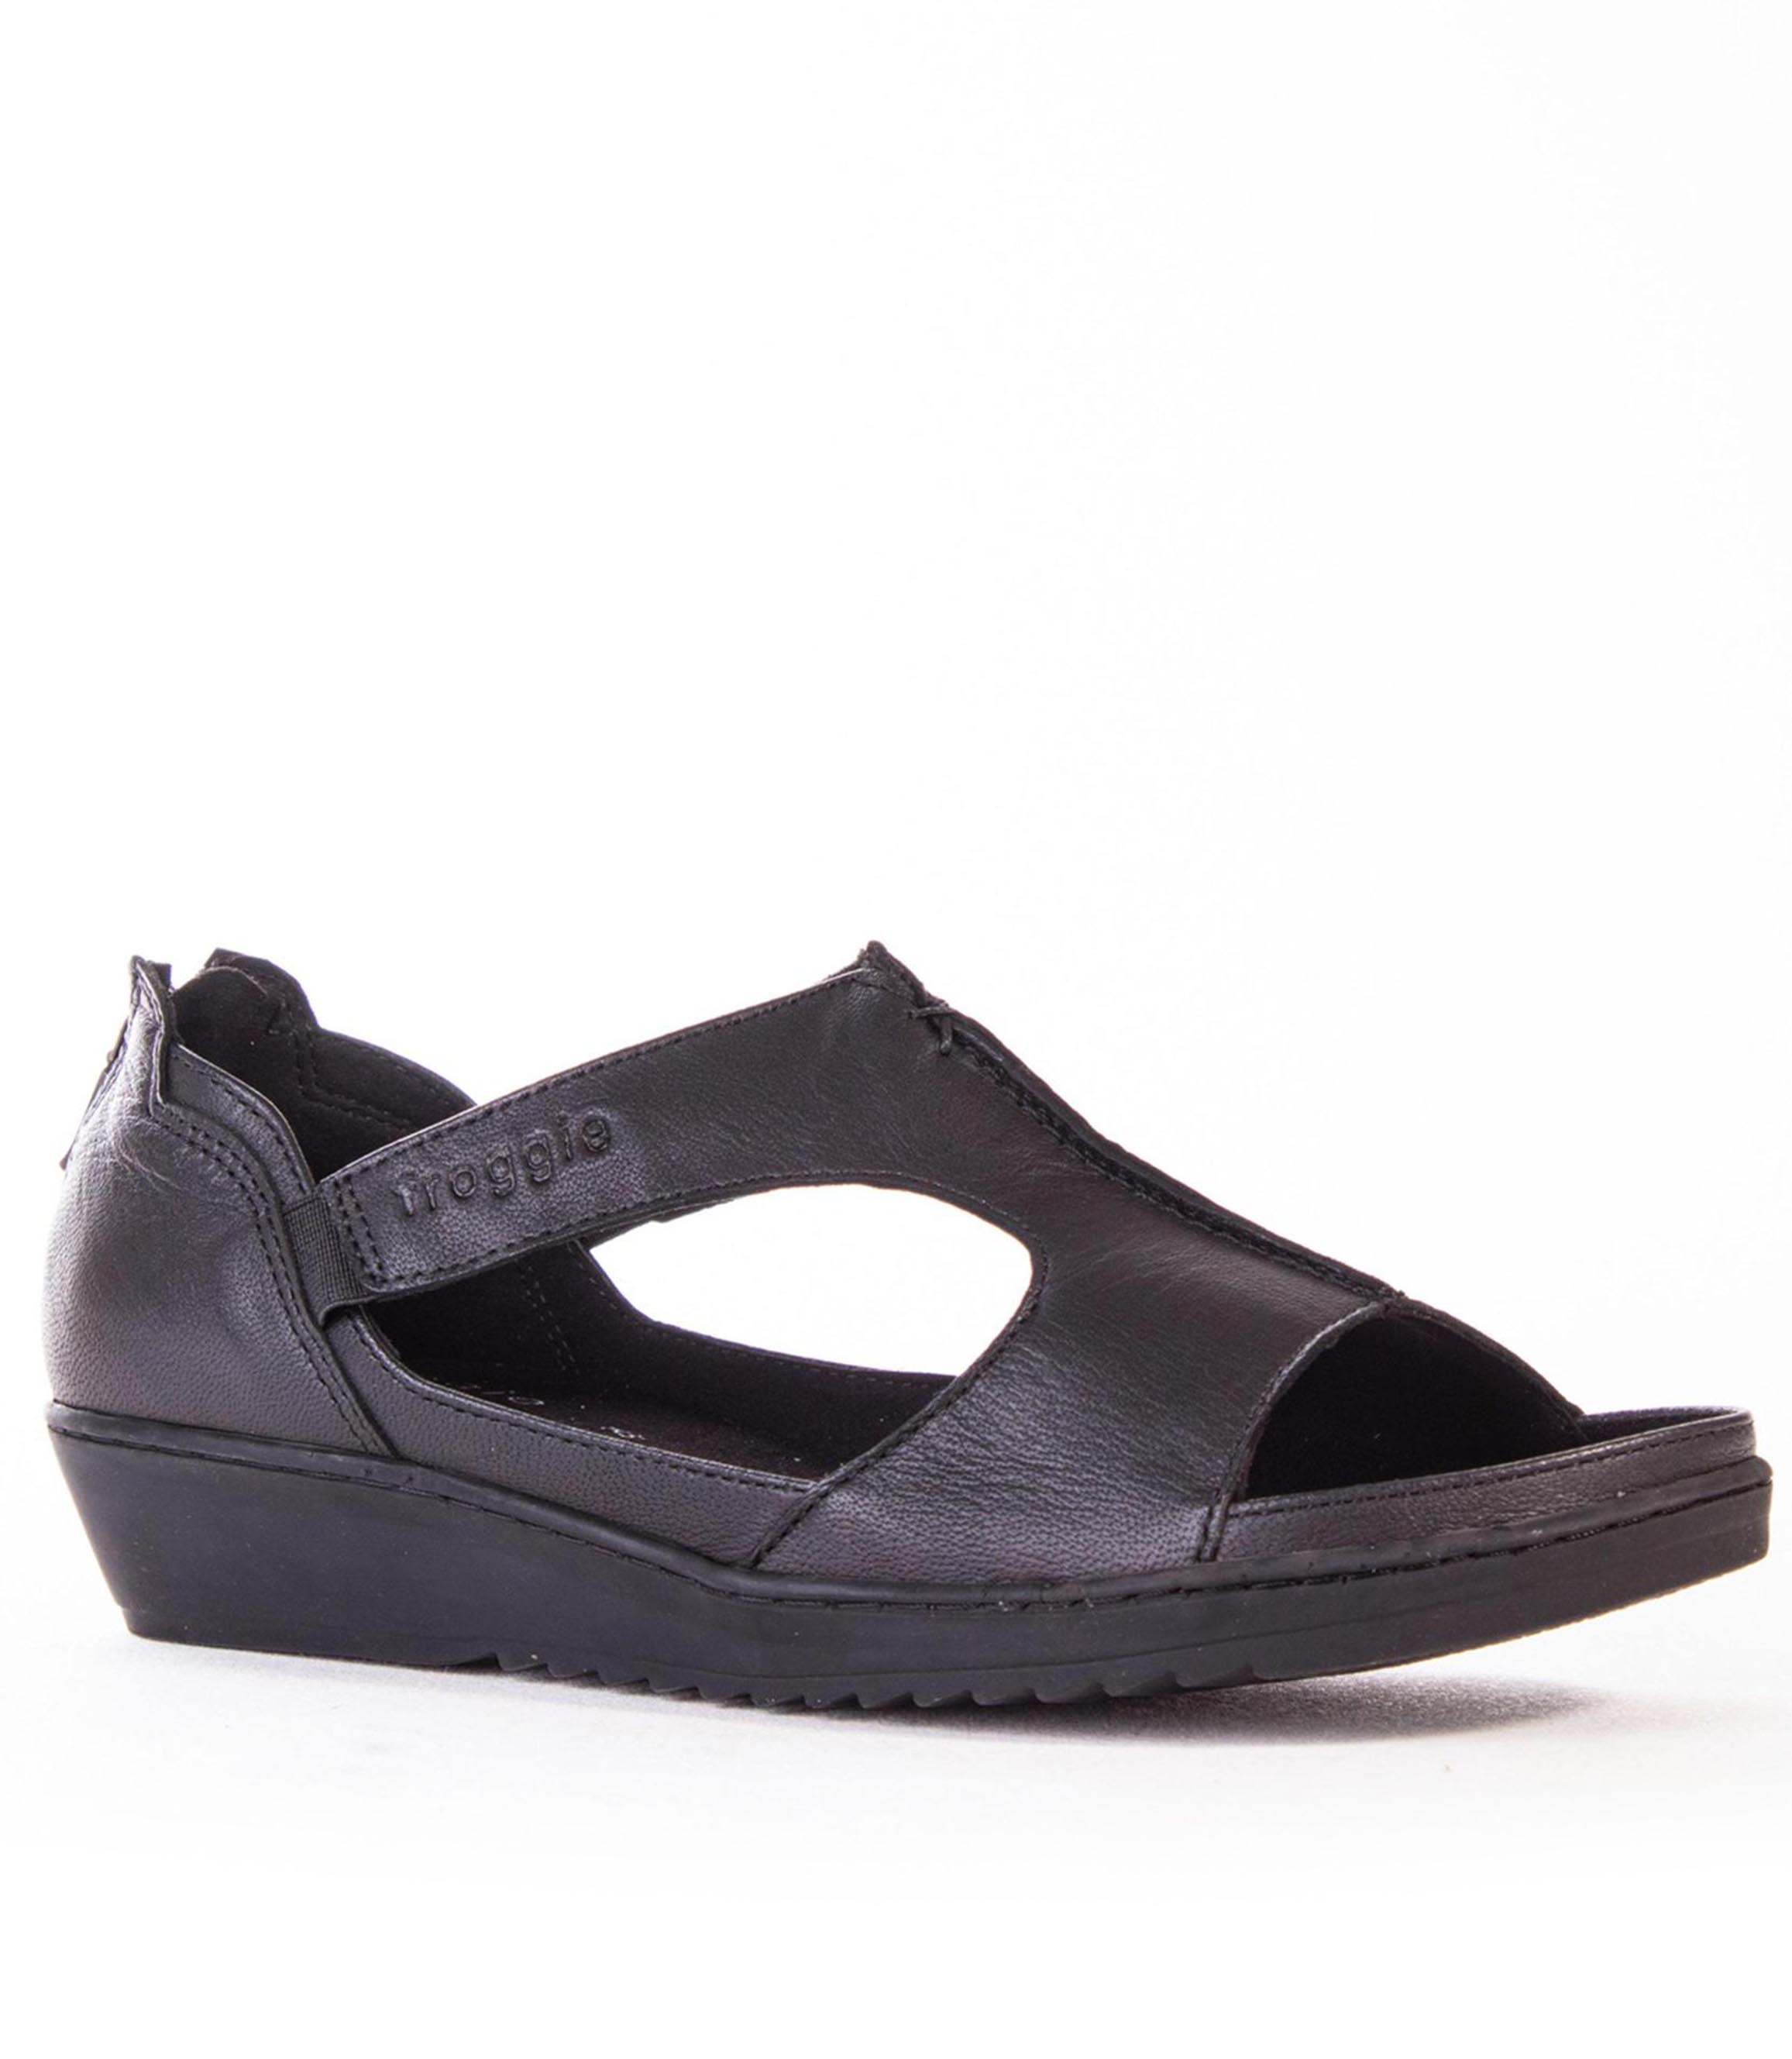 FROGGIE BLACK LEATHER T-BAR SANDAL WITH REMOVABLE FOOTBED | Rosella ...